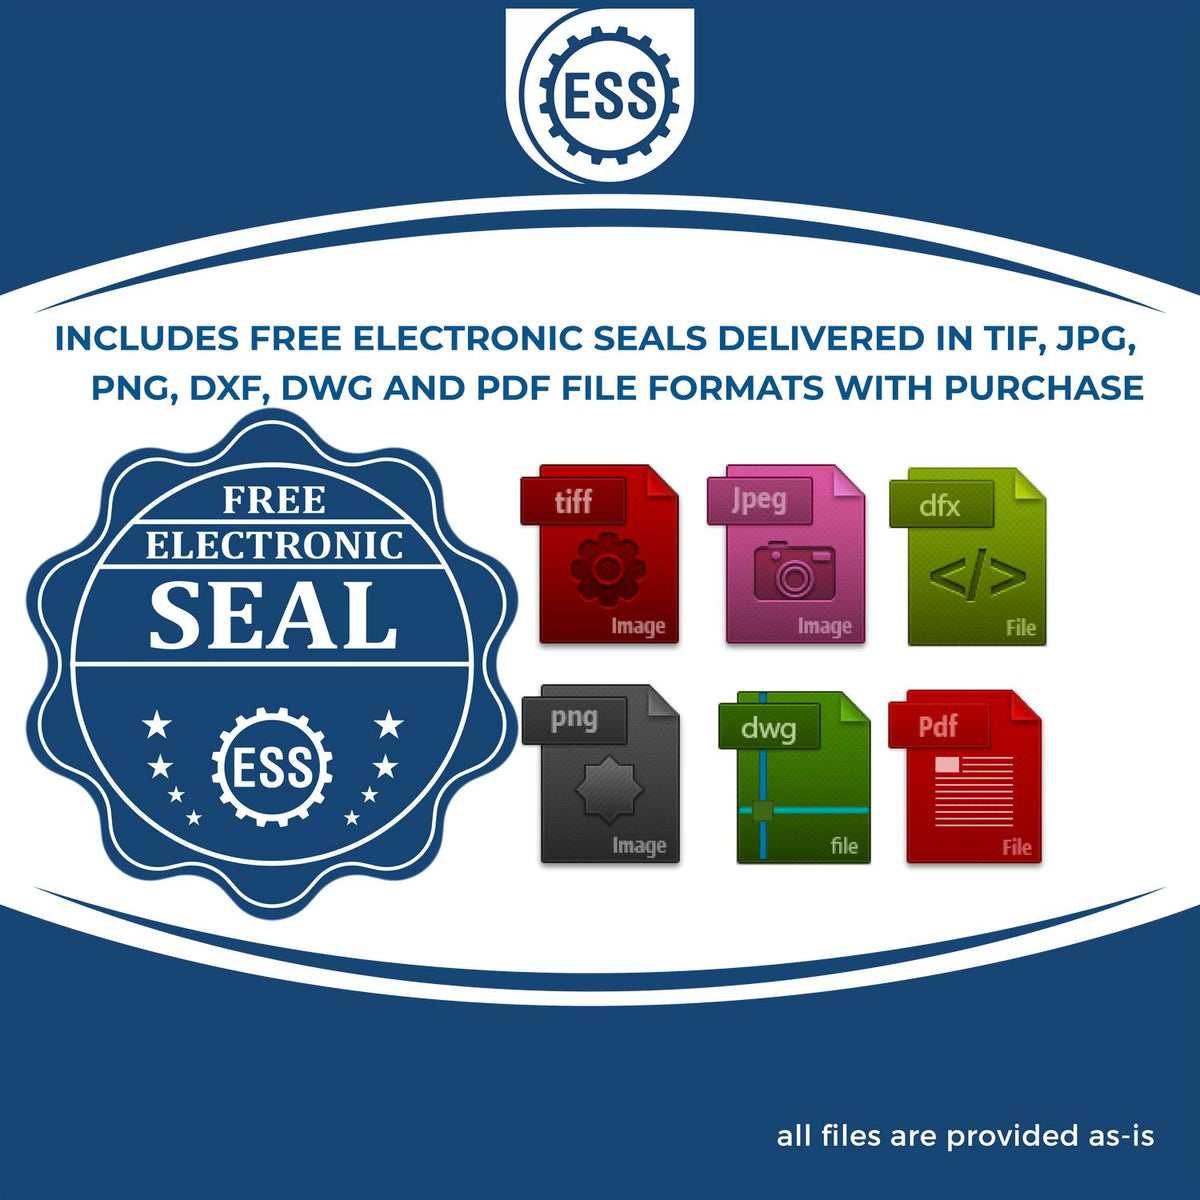 An infographic for the free electronic seal for the Gift Idaho Geologist Seal illustrating the different file type icons such as DXF, DWG, TIF, JPG and PNG.